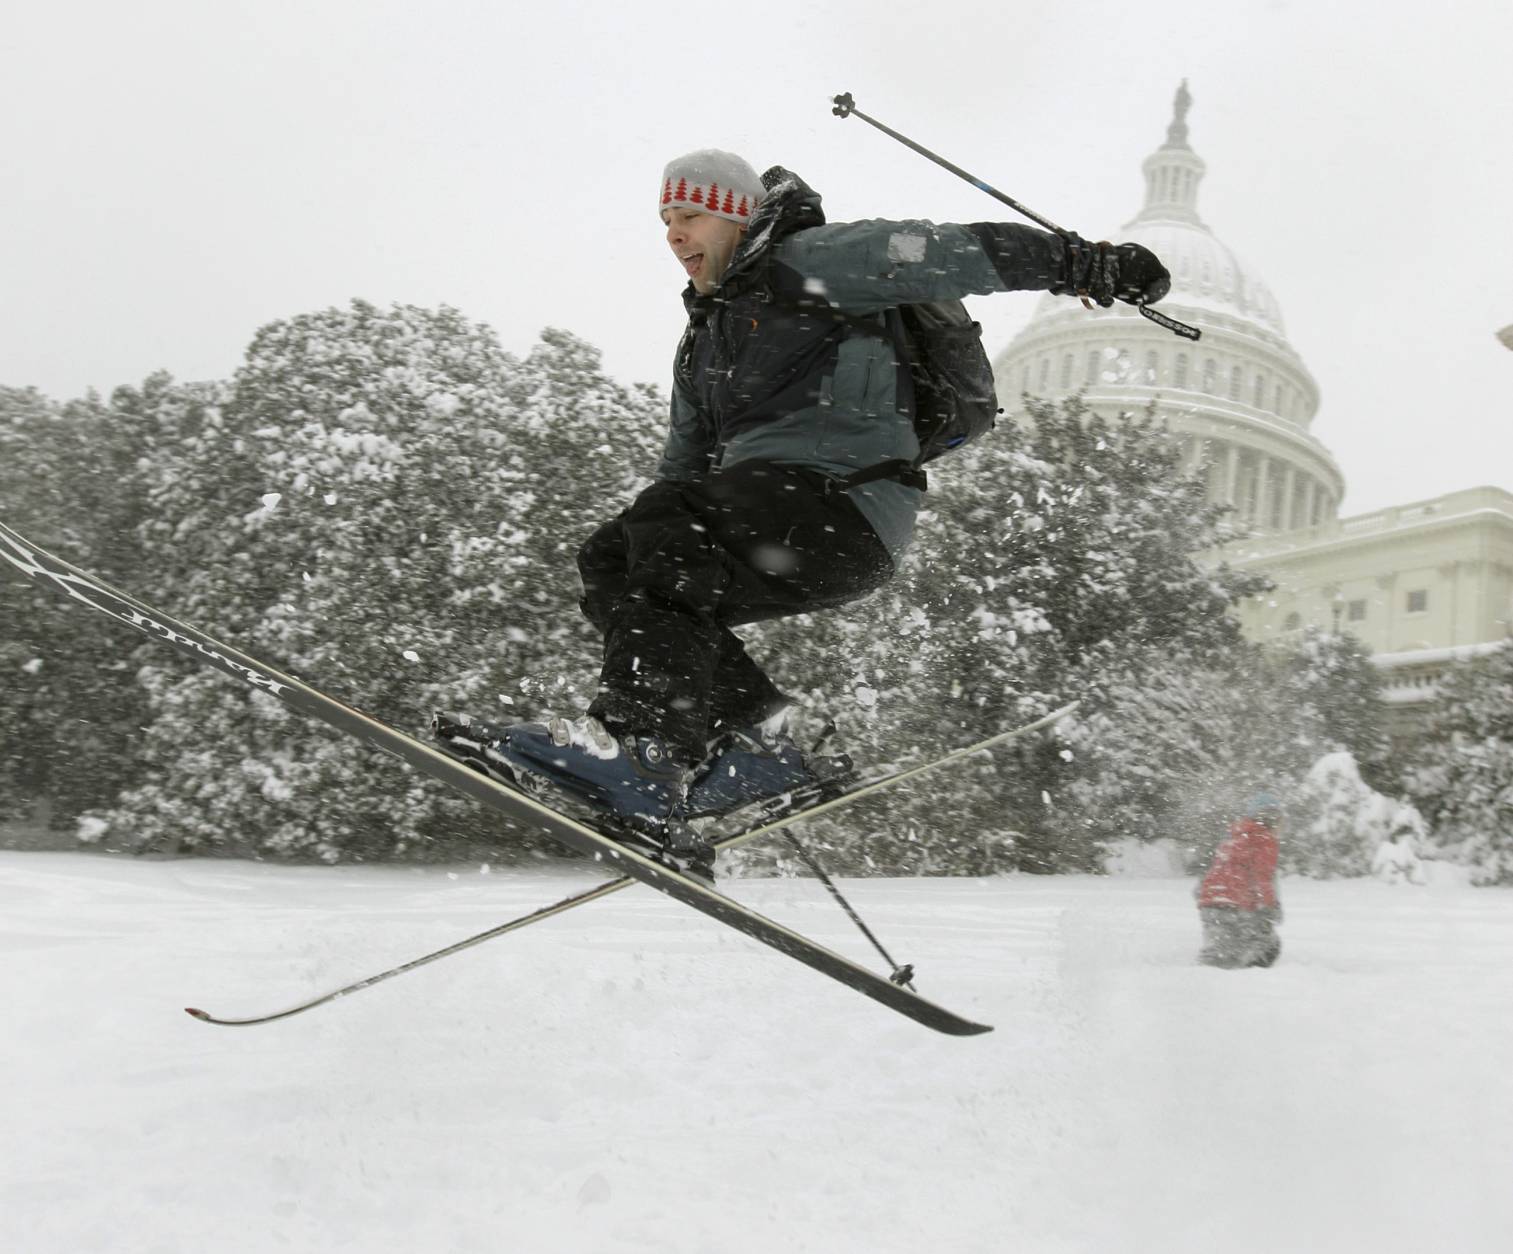 Andrew Kermick, who works on Capitol Hill, goes airborne as he skis in the snow on the West Front of the U.S. Capitol in Washington, Saturday, Dec. 19, 2009. (AP Photo/Alex Brandon)